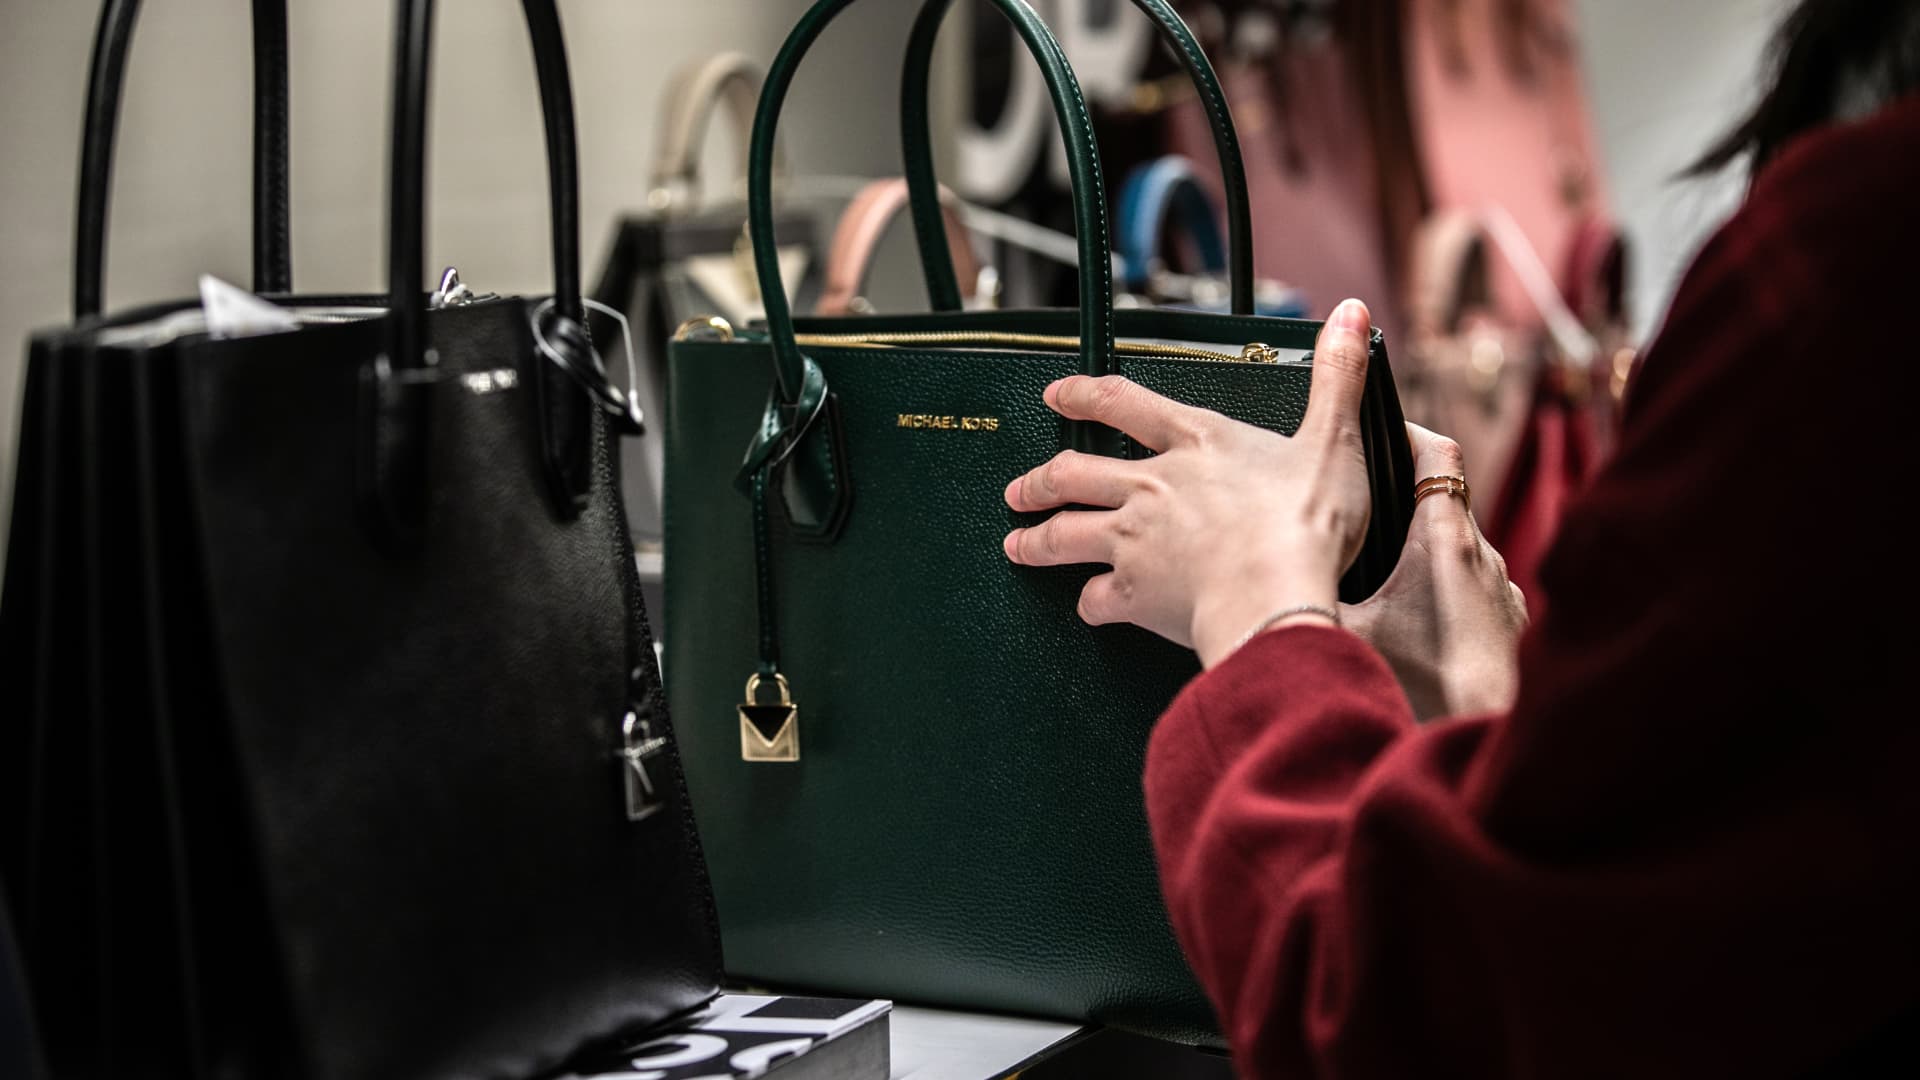 Michael Kors Wants You to Stop Following All Those Old Fashion